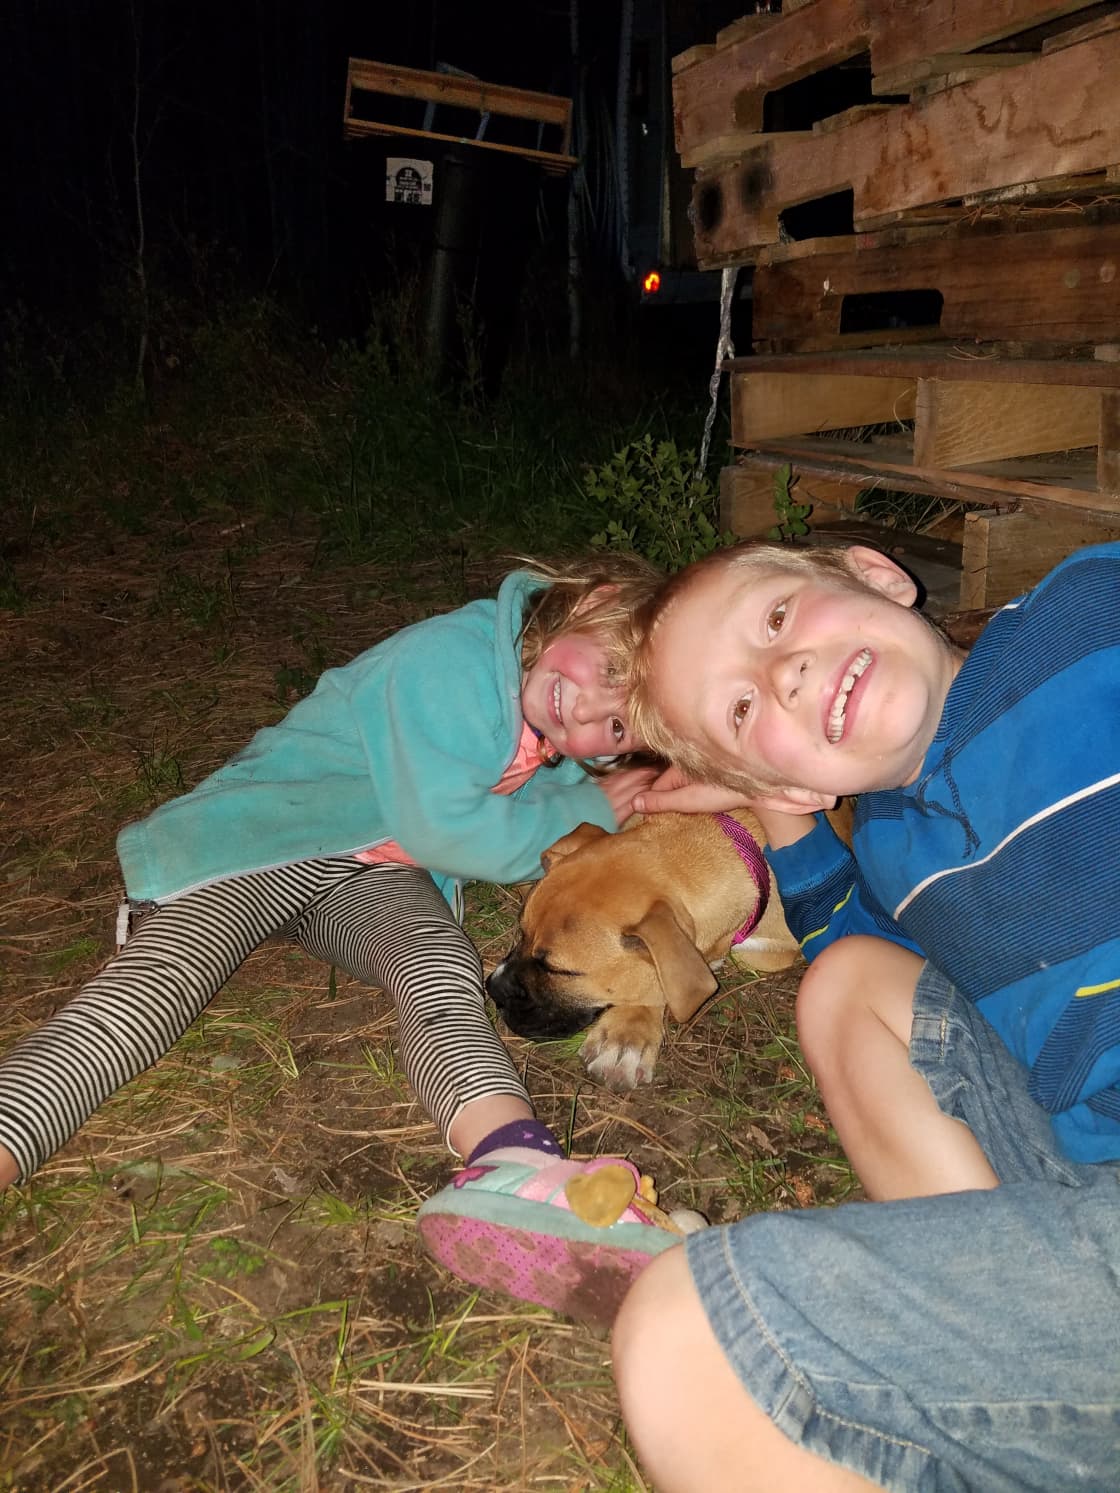 Getting ready for the campfire, snuggling up the pup.